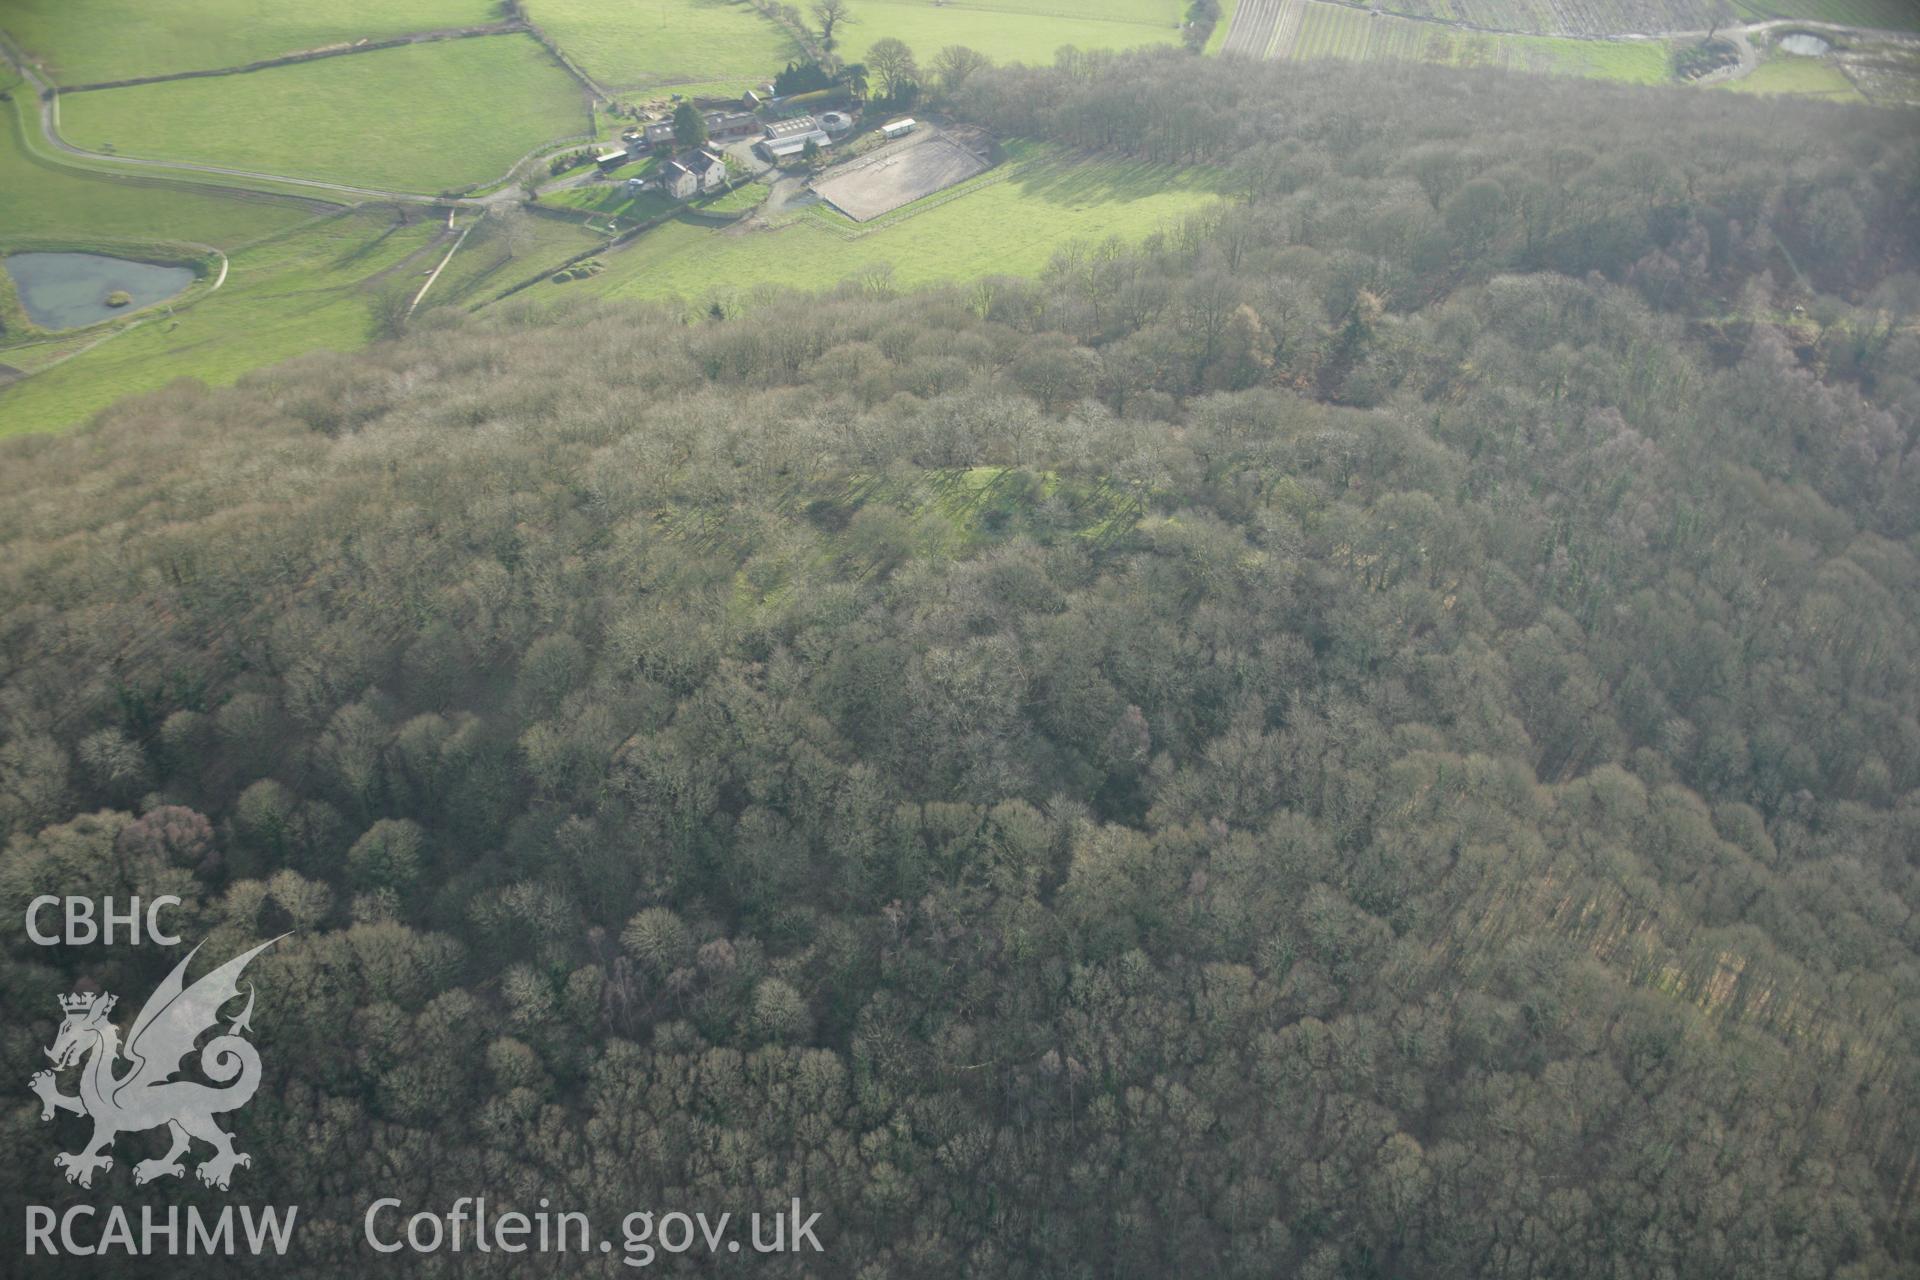 RCAHMW colour oblique aerial photograph of Gaer Fawr, Guilsfield. A landscape view from the west. Taken on 25 January 2007 by Toby Driver